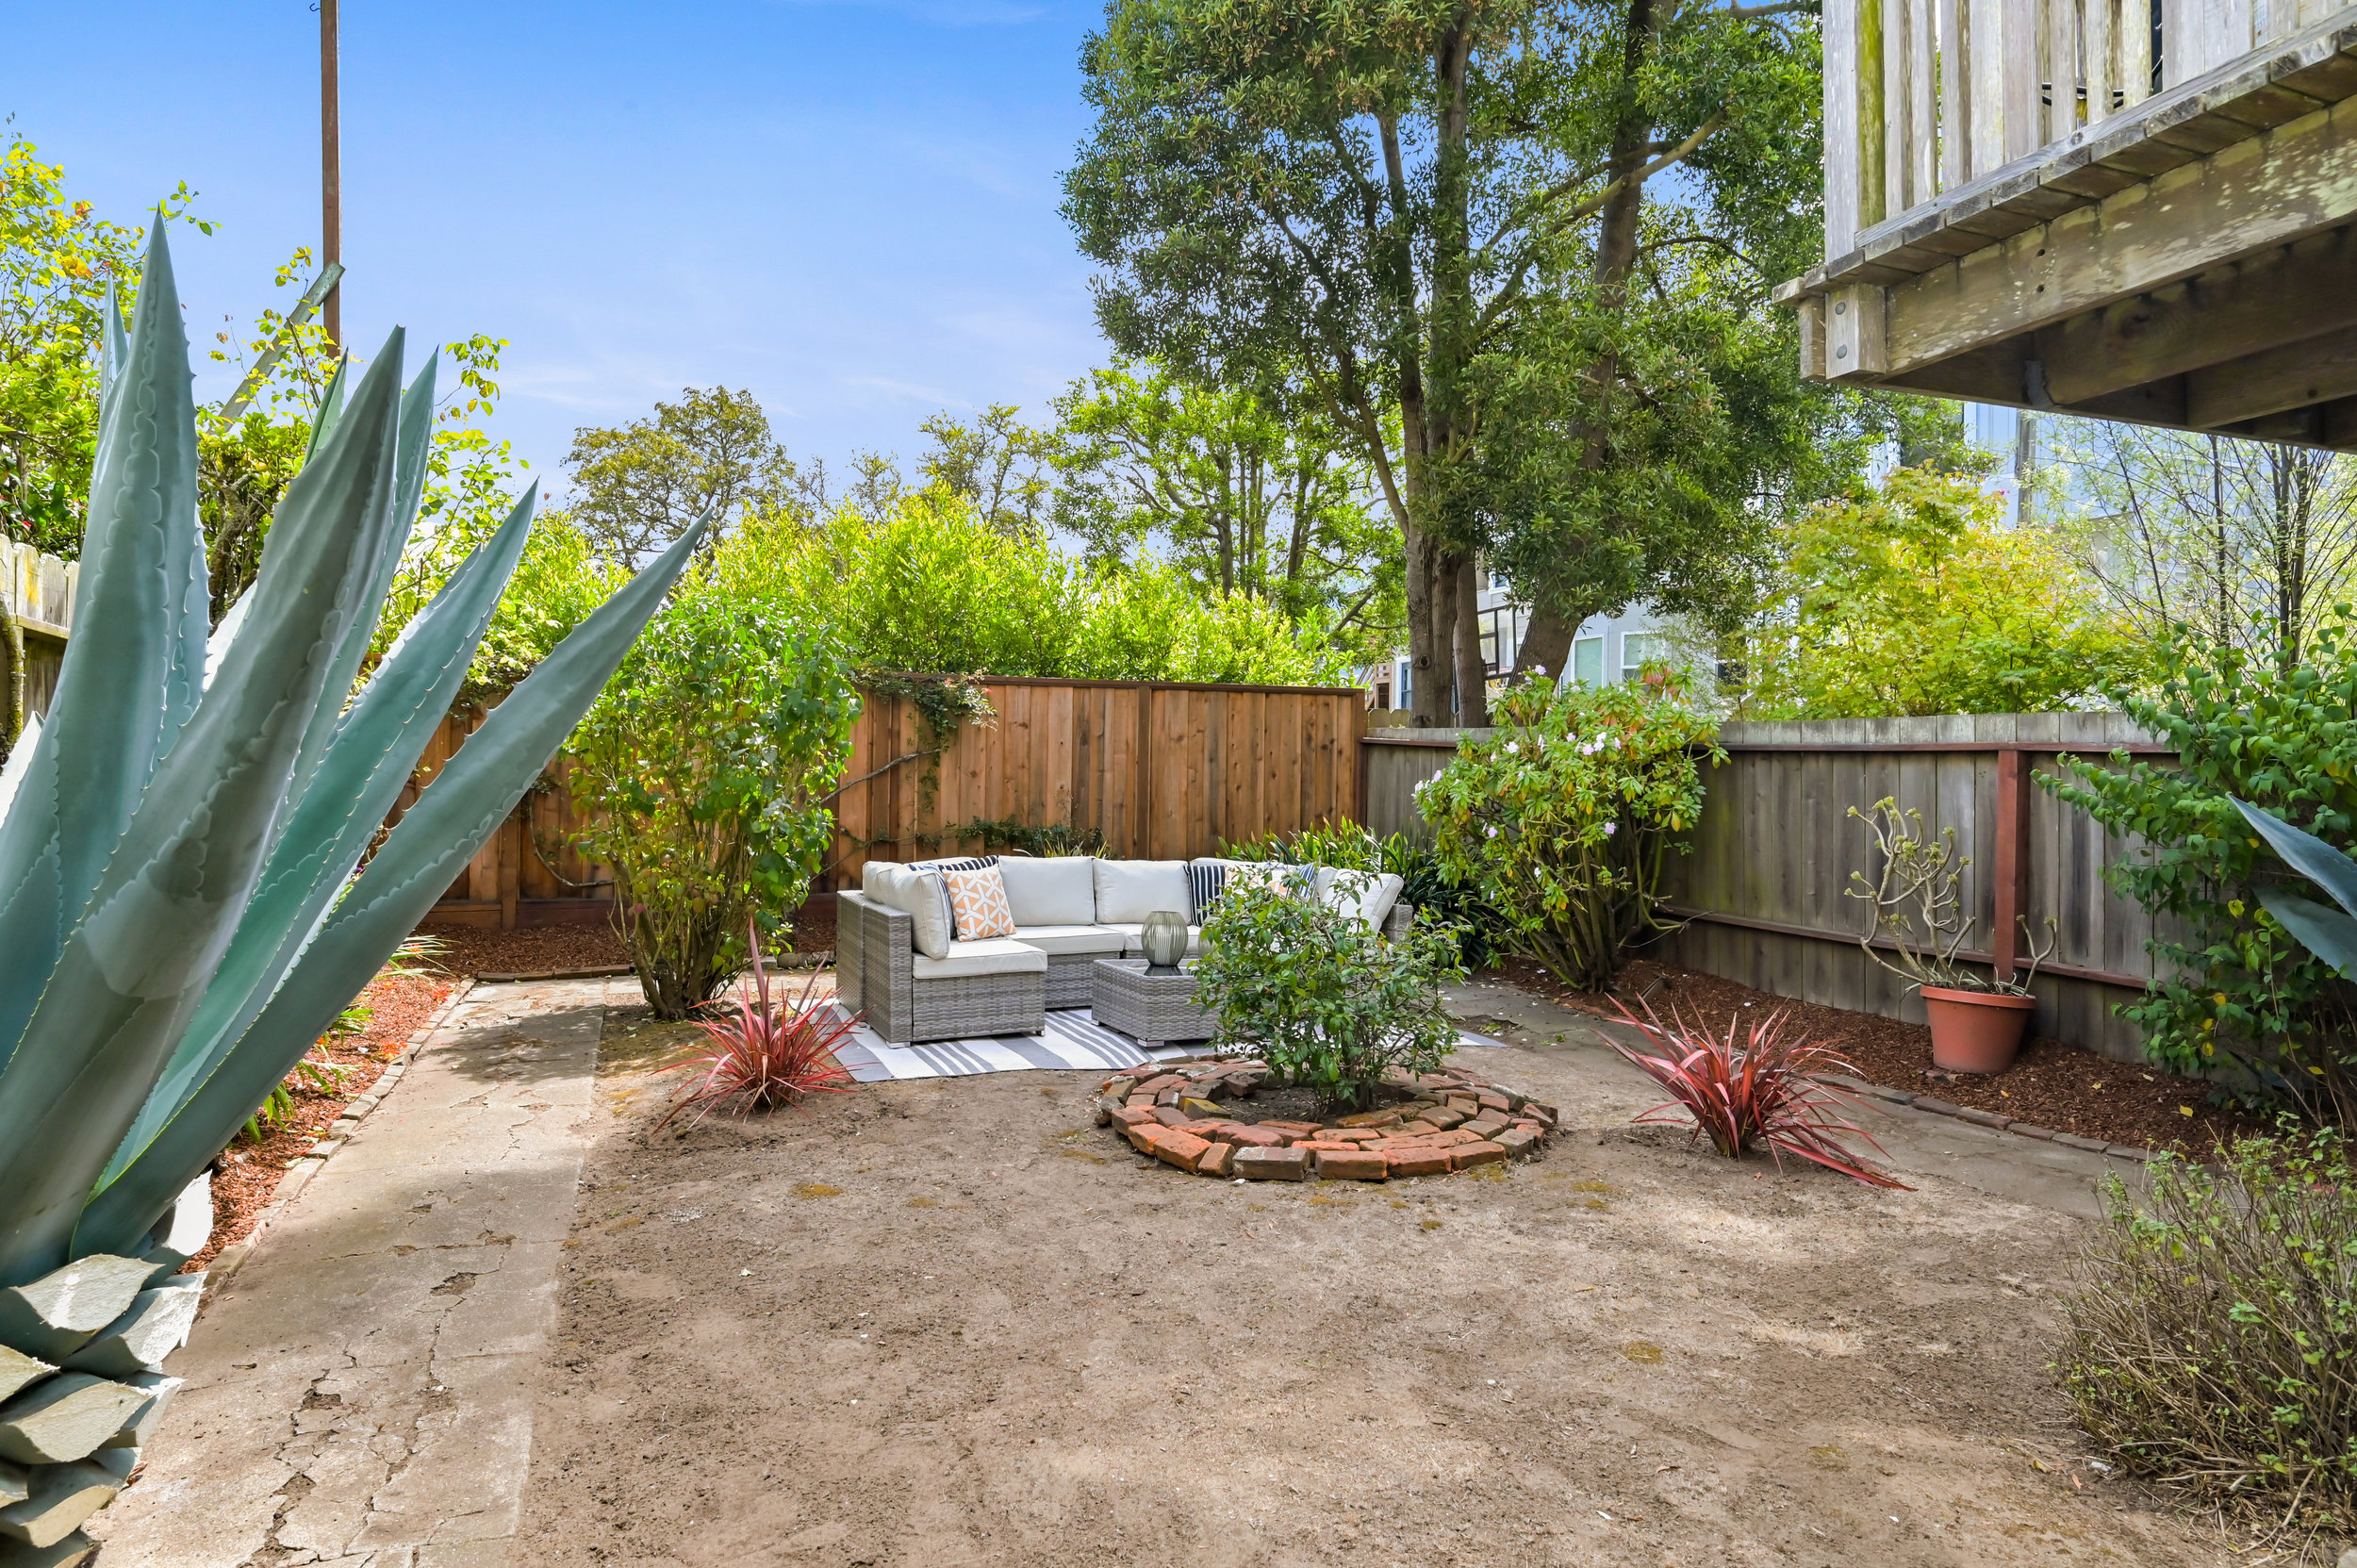 Property Photo: View of the private yard at 637-639 Lake Street, showing an outdoor living area